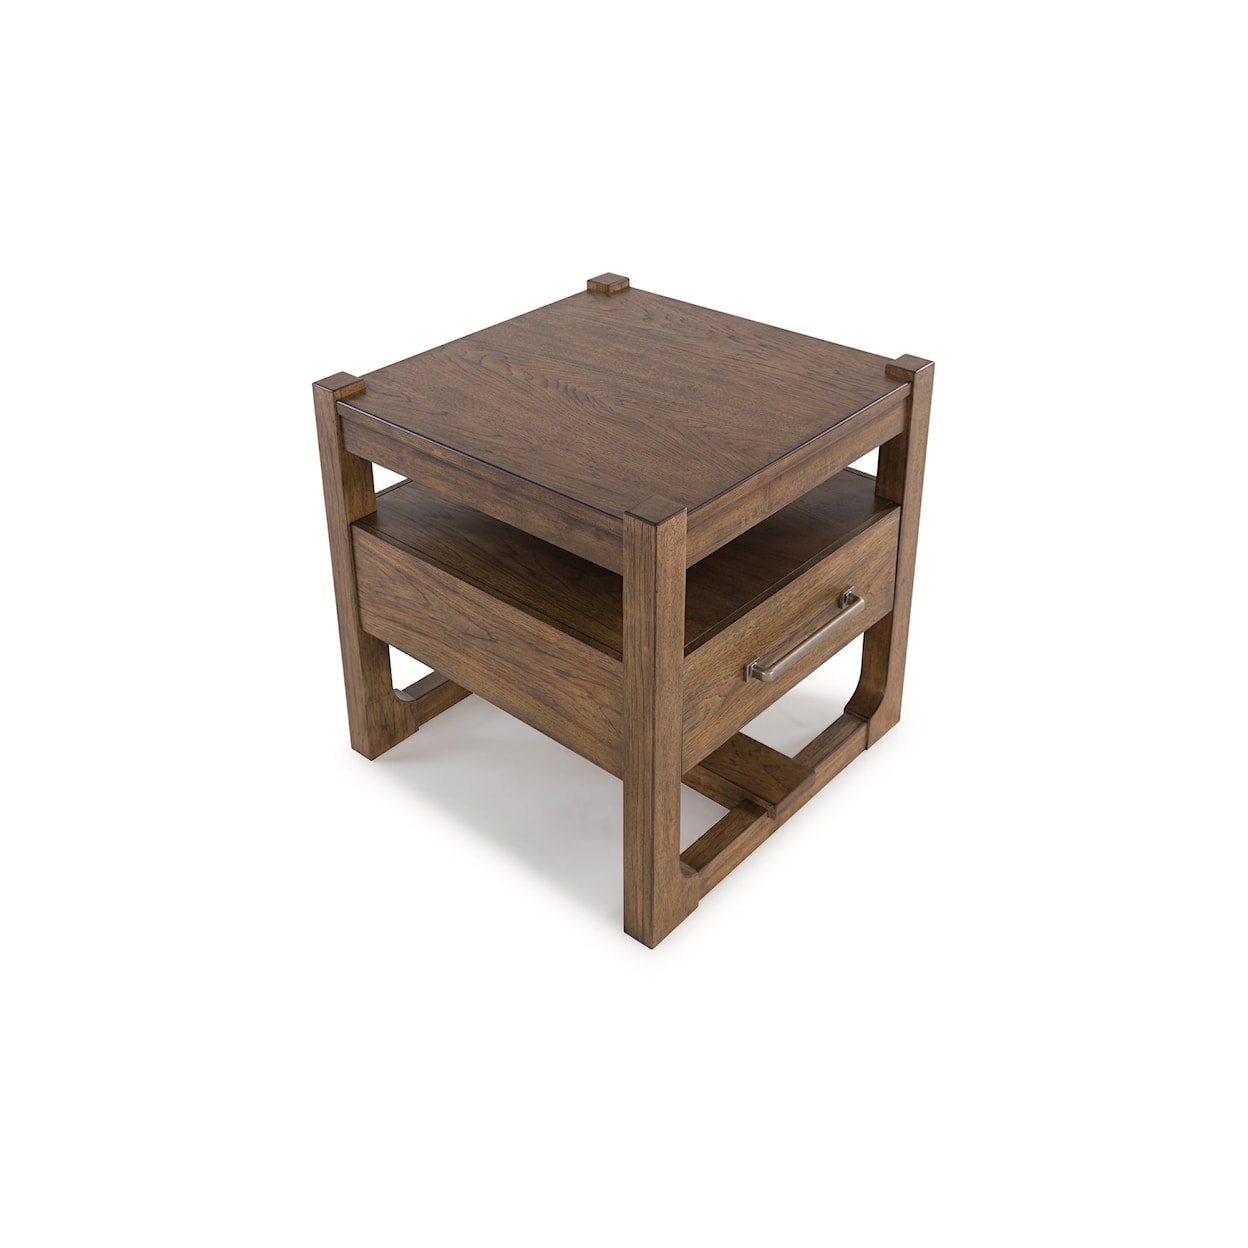 Belfort Select Mather Square End Table